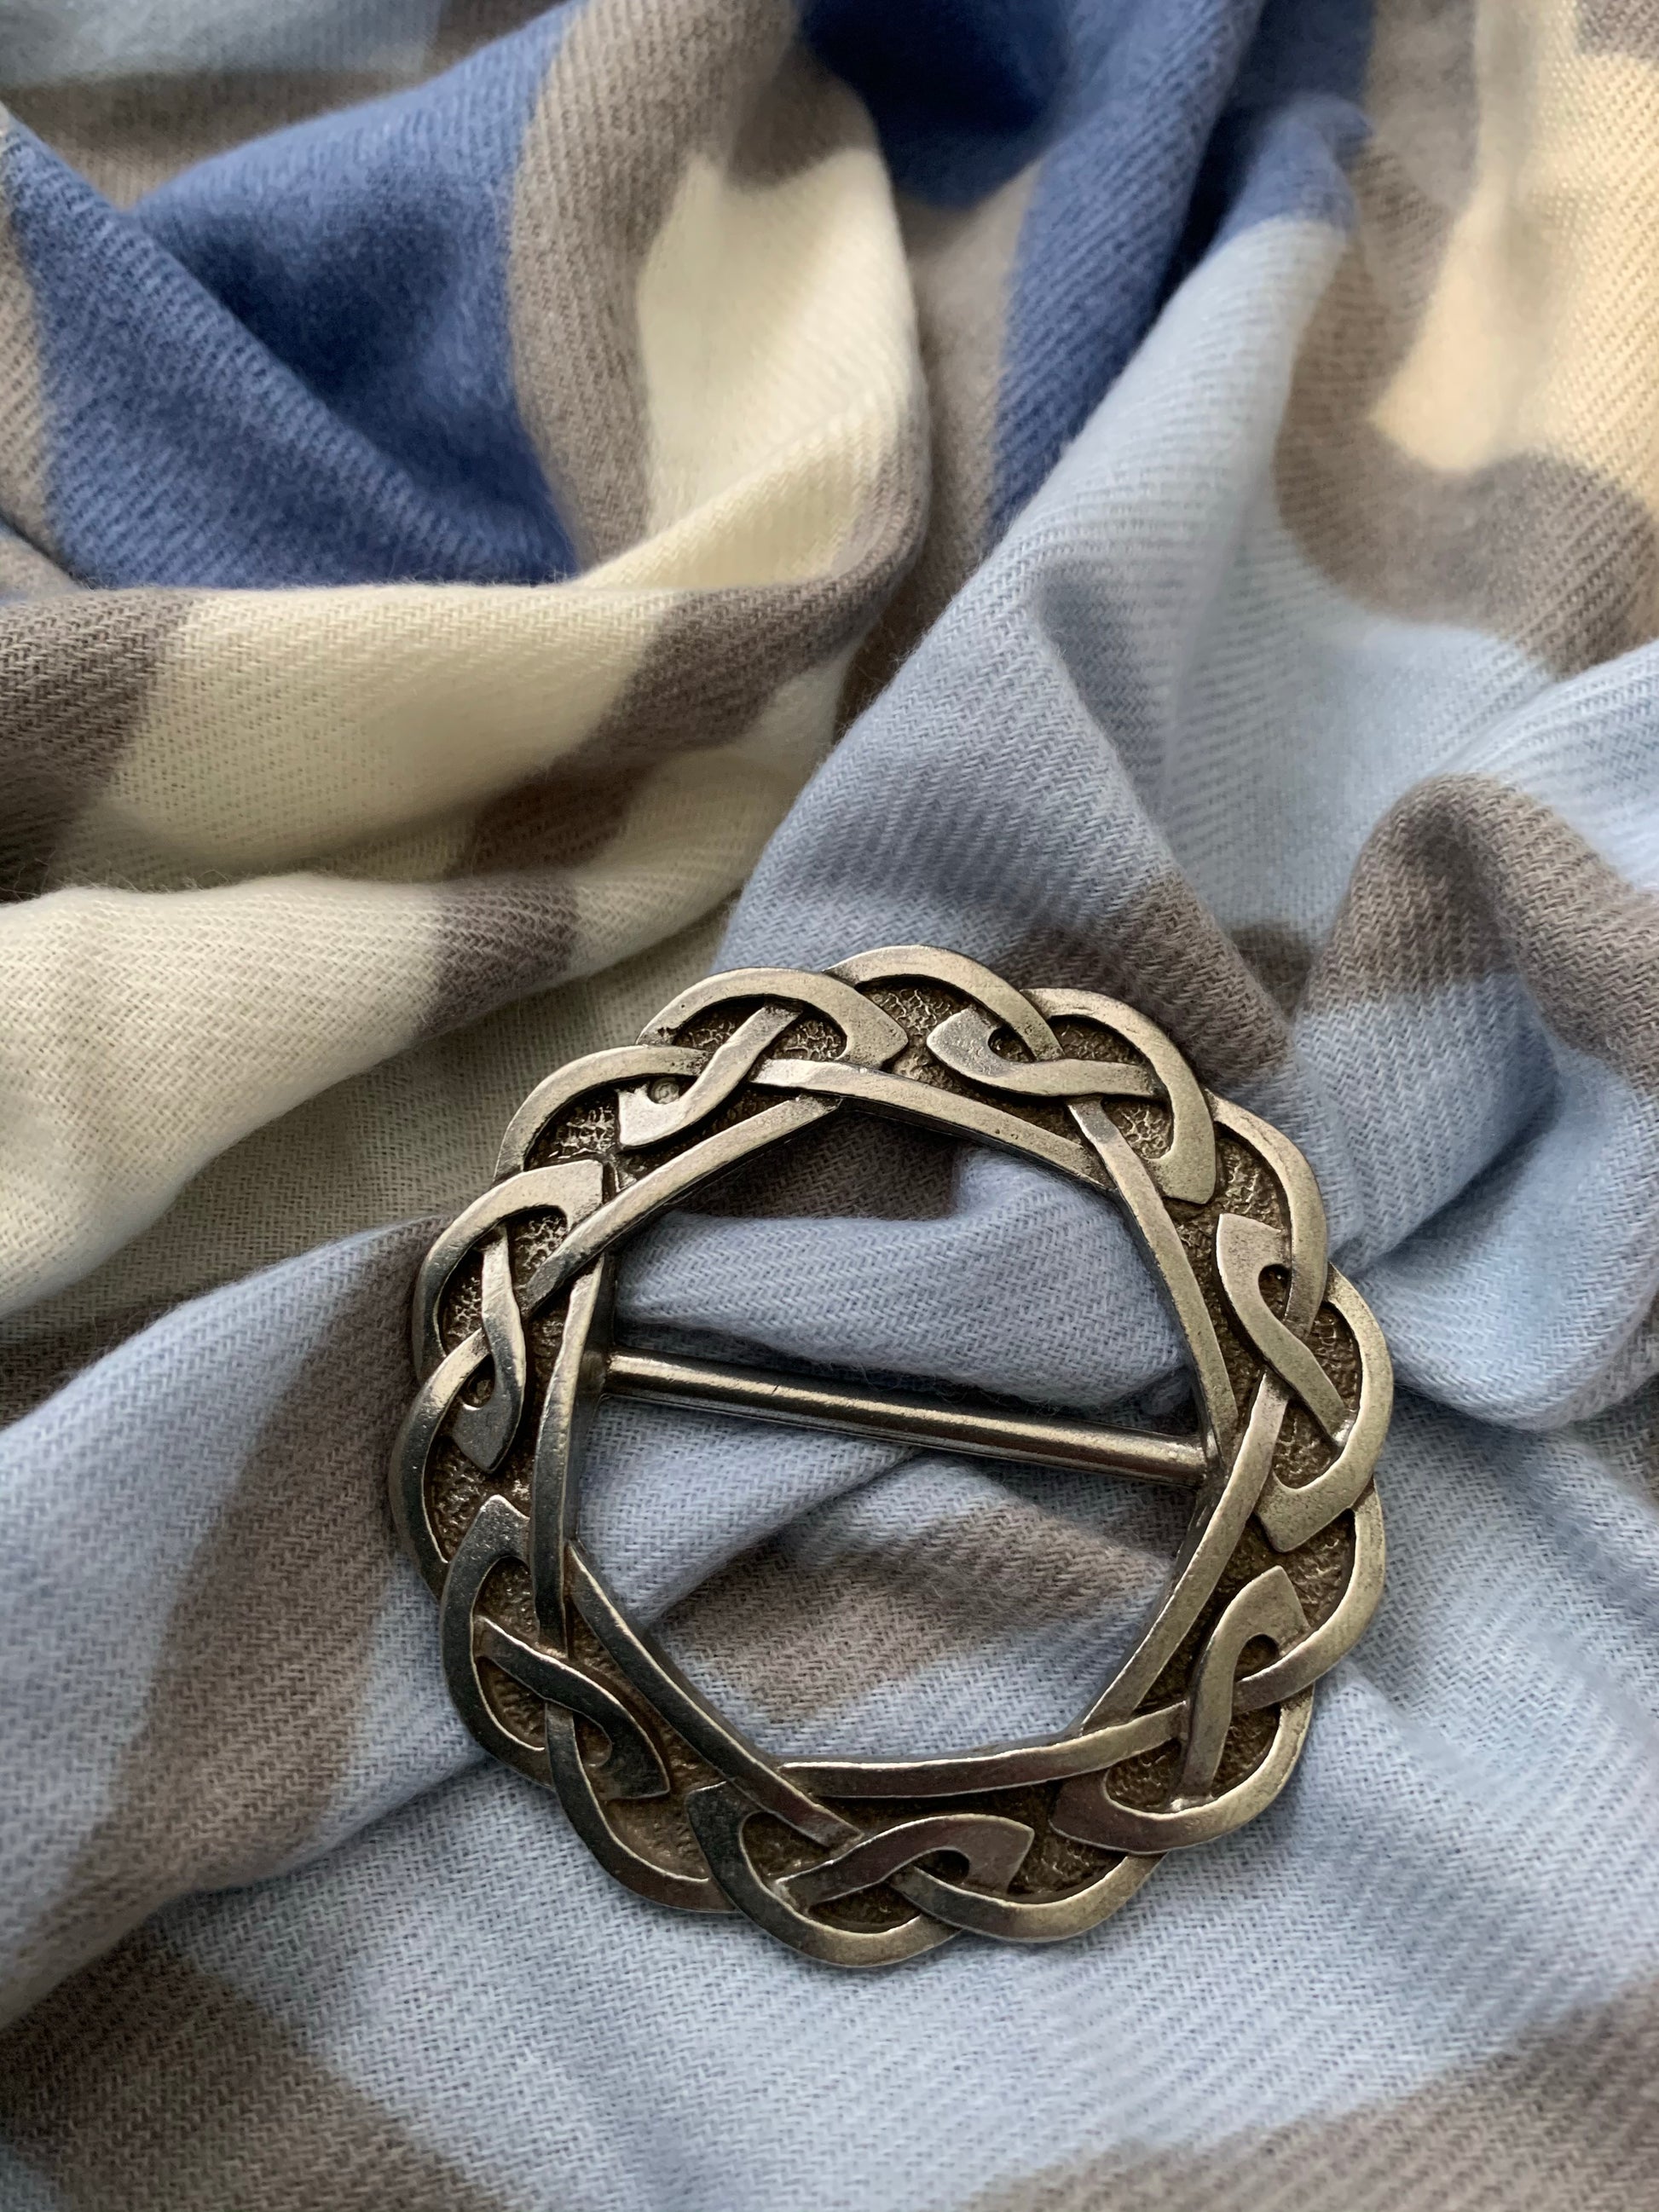 Cornwall Pewter Scarf Ring with Celtic Knot Design